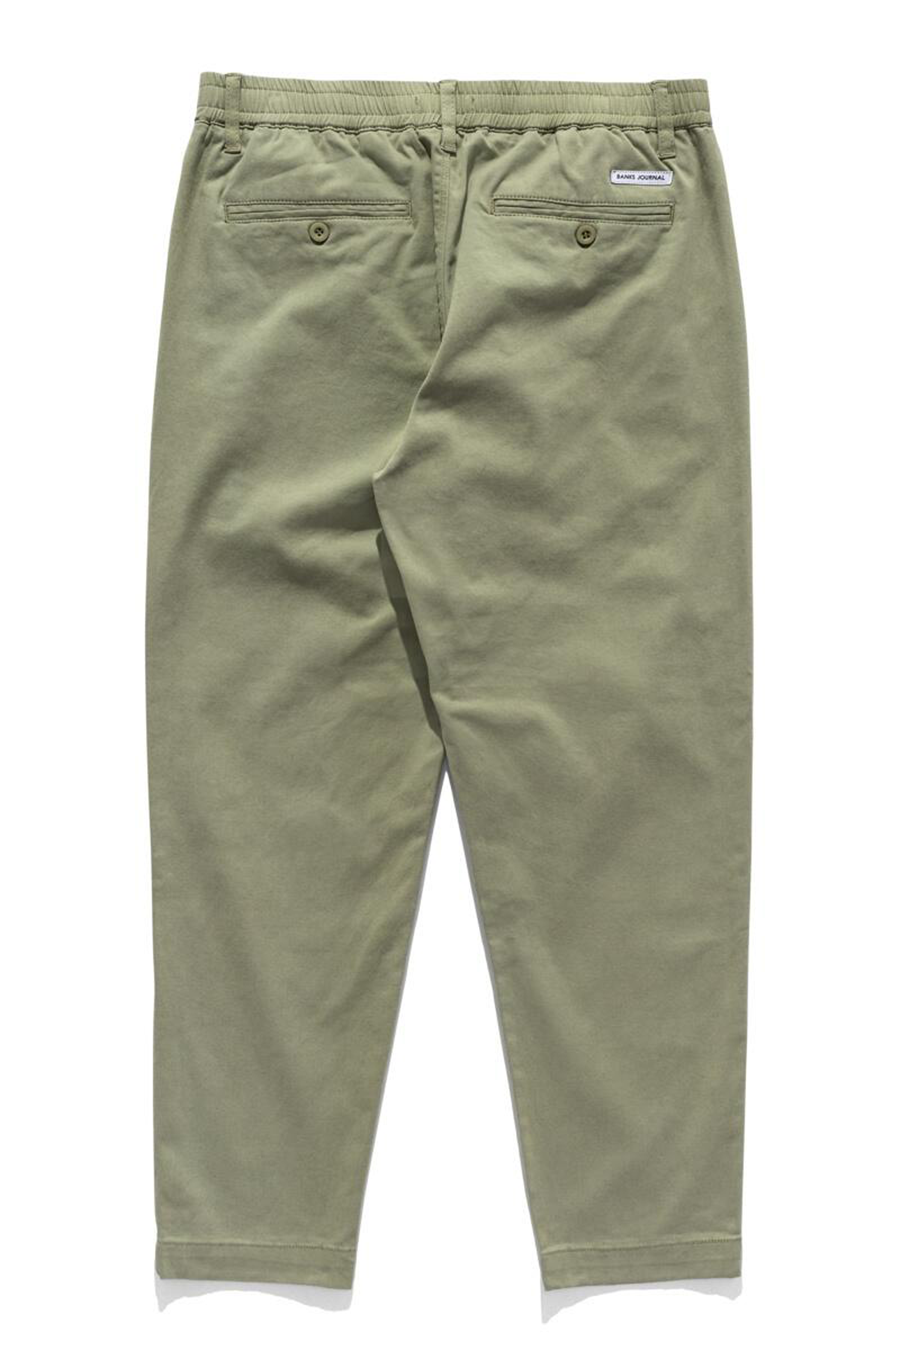 Supply Pant | Green Tea - Main Image Number 2 of 2